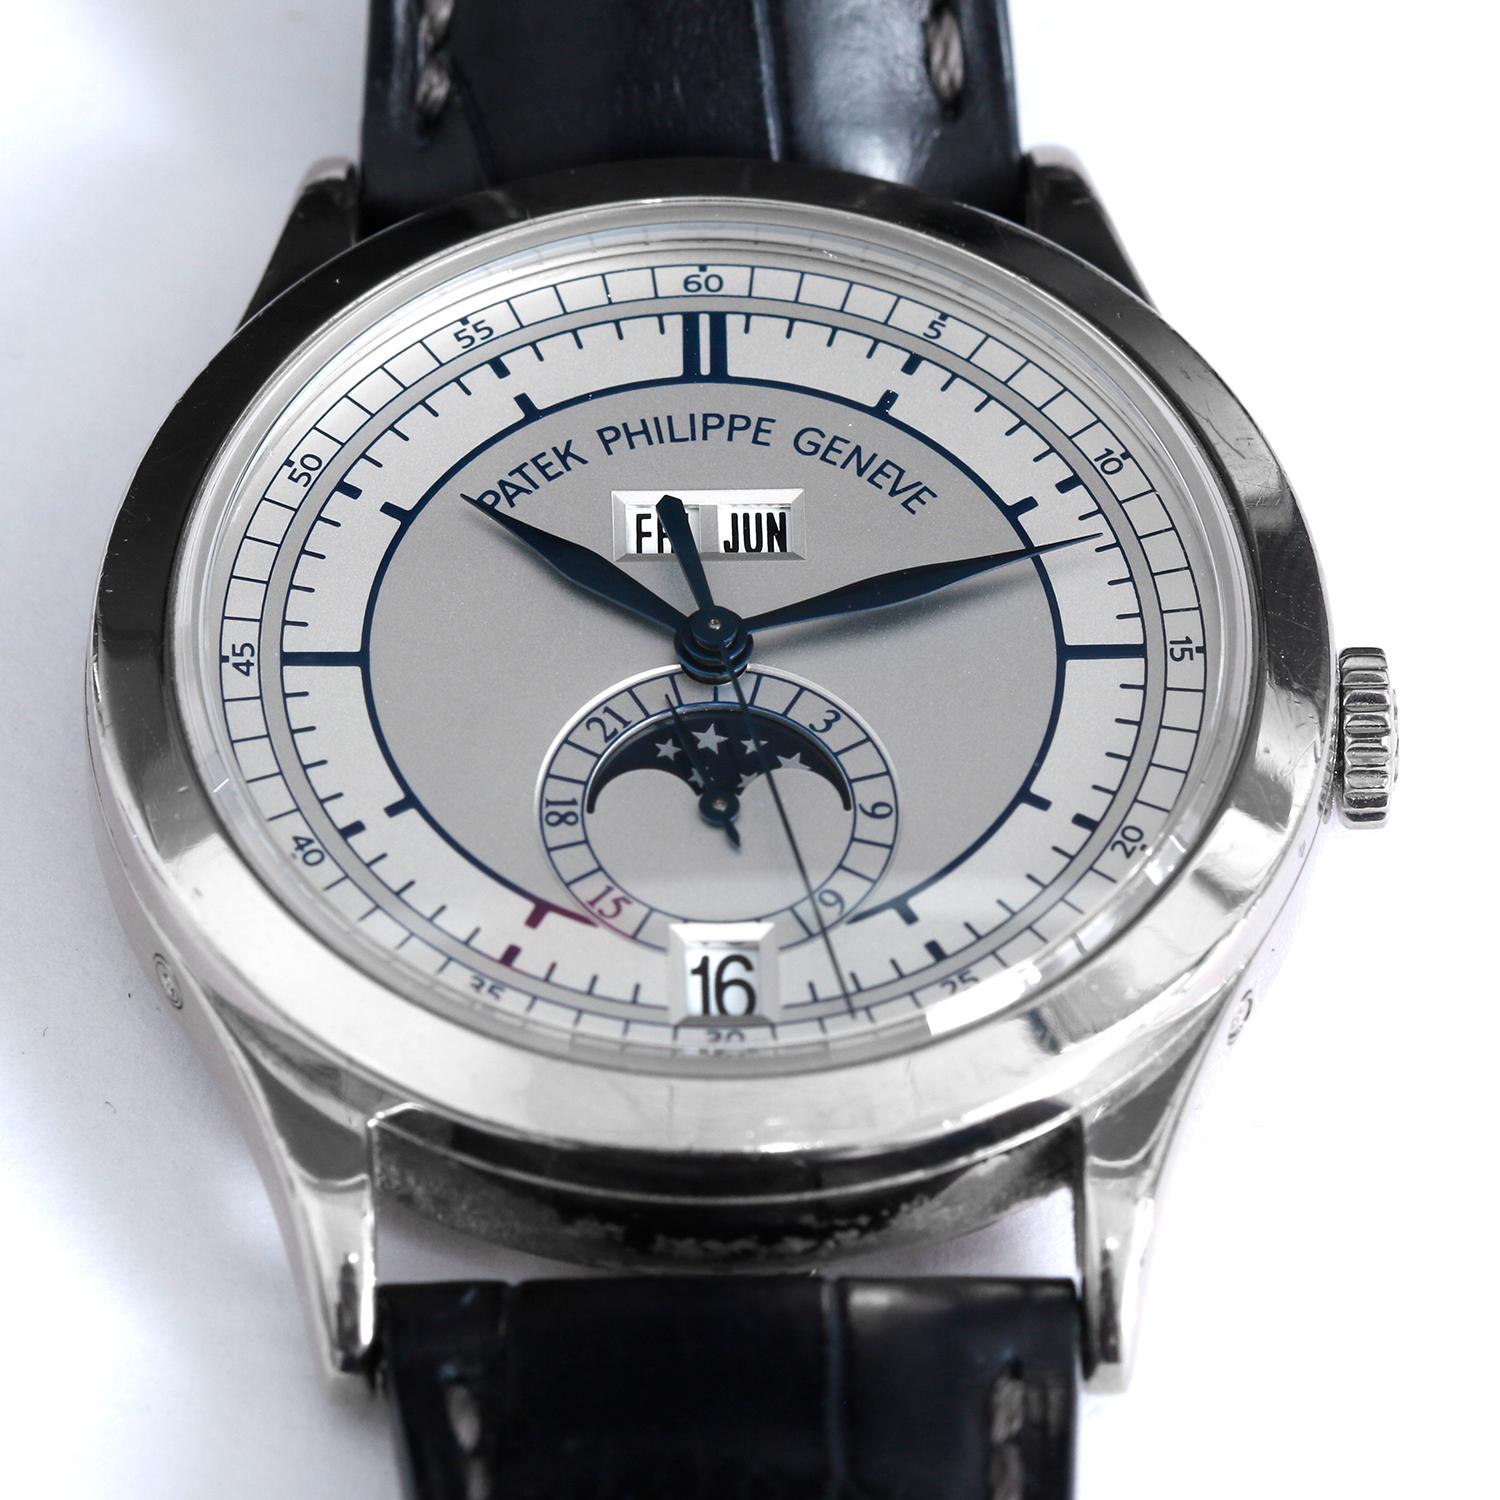 Patek Philippe Annual Calendar with Moon Phase 5396 G (or 5396G-001) 1